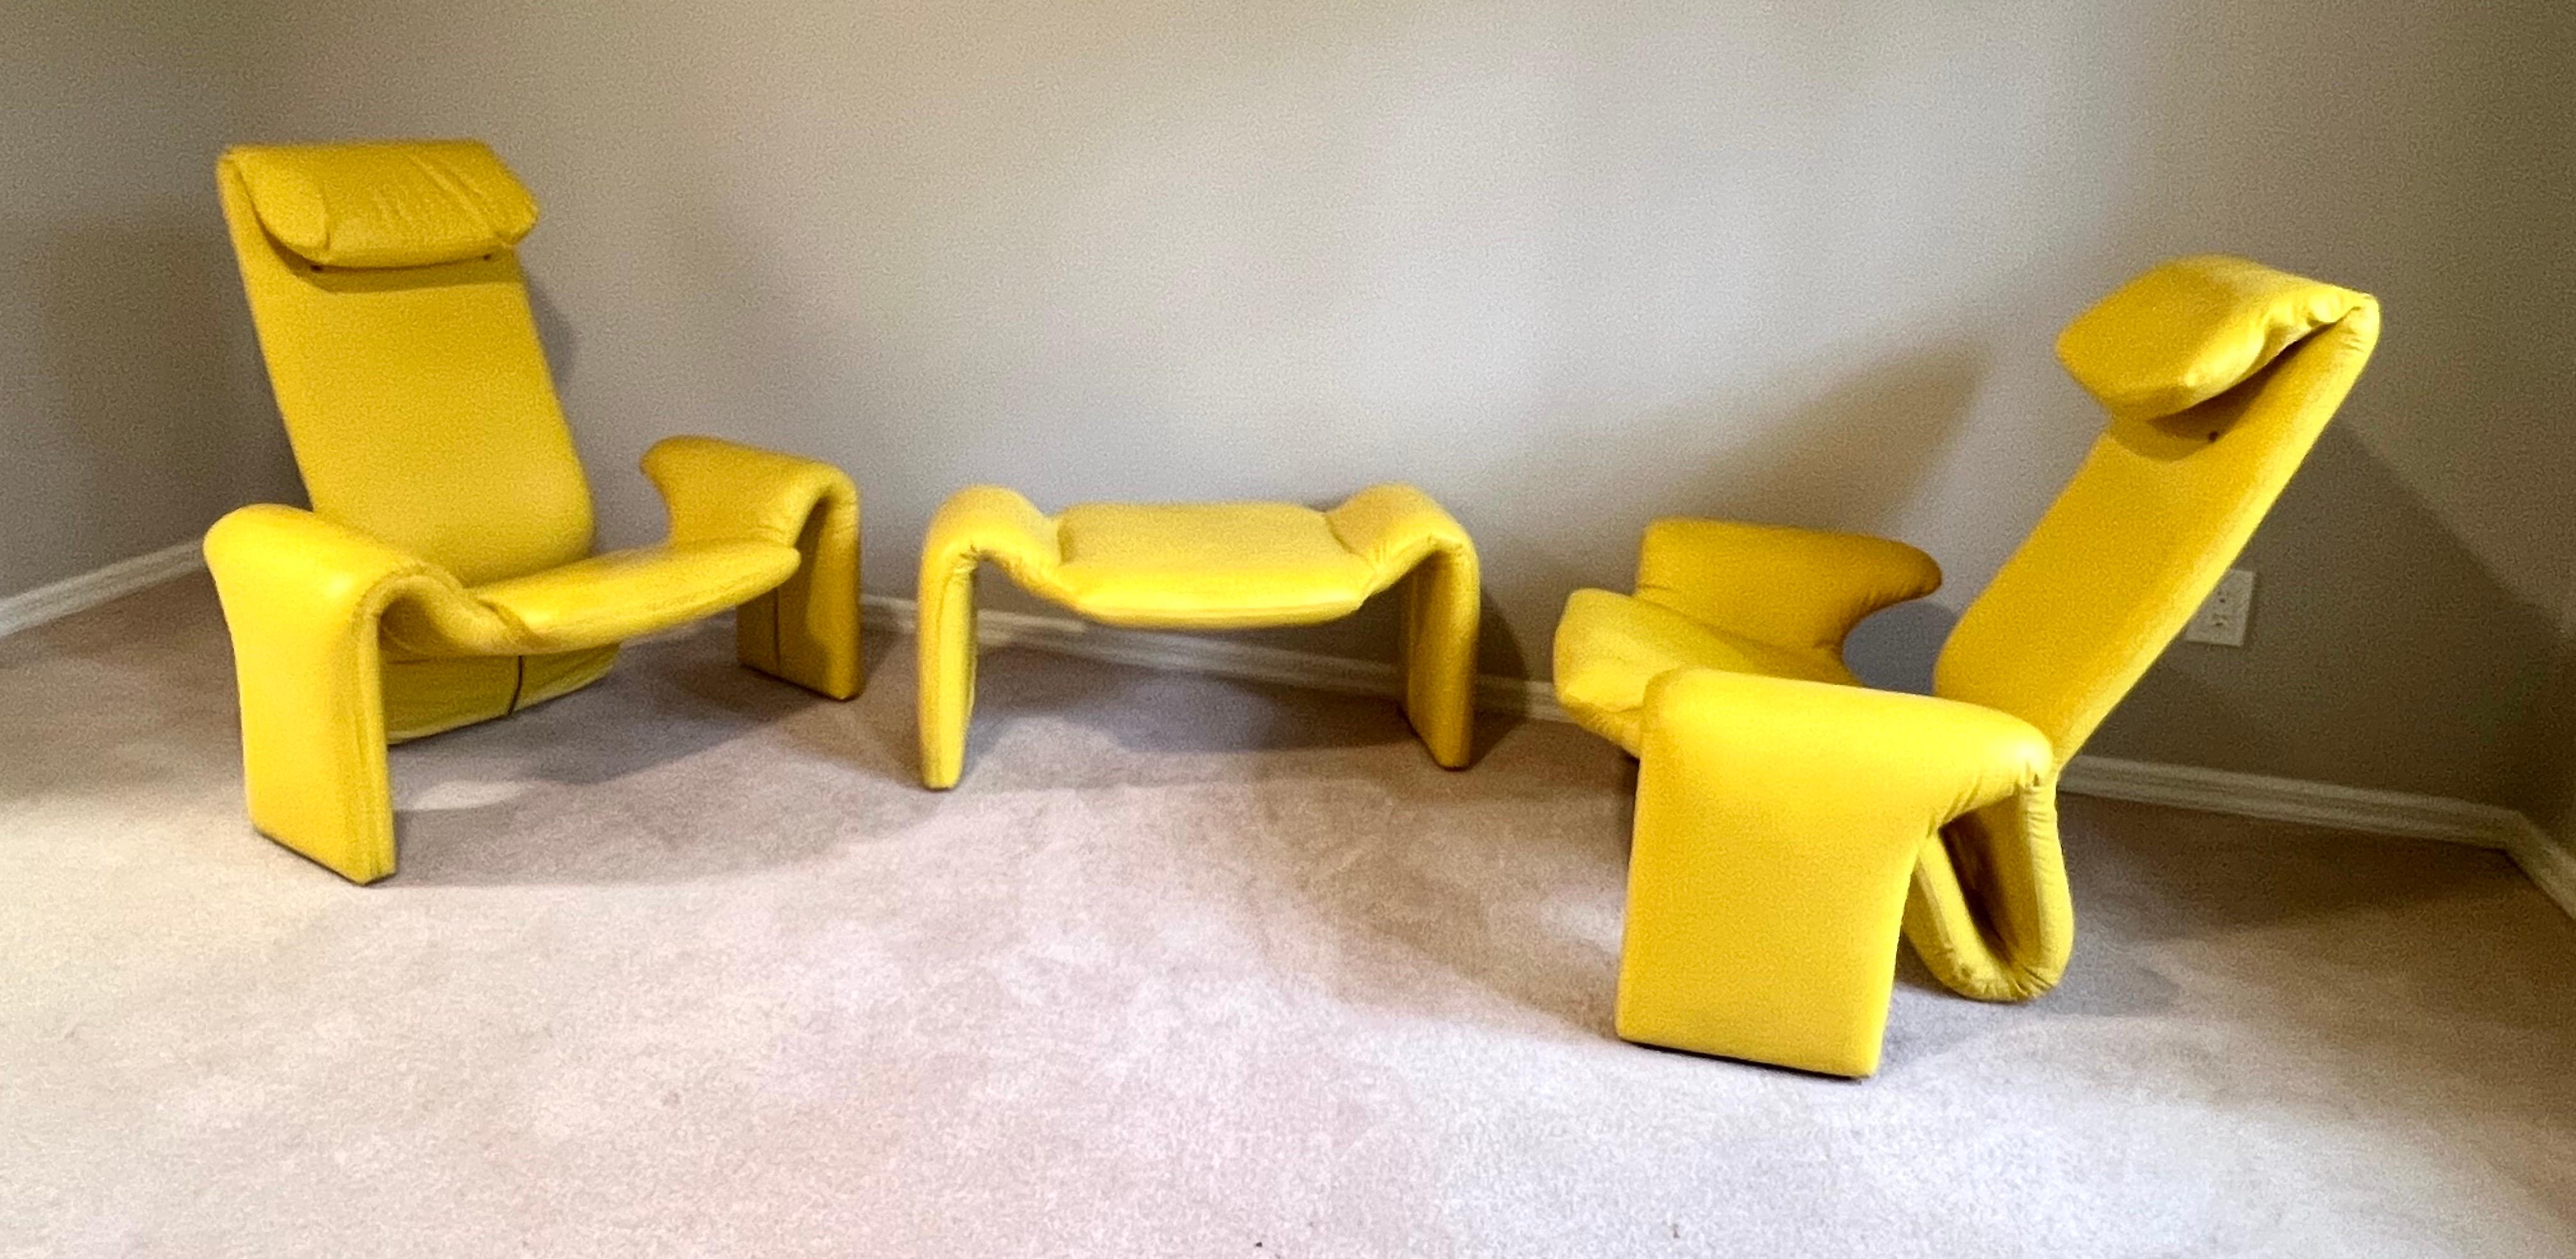 A Rare and Important Set of 2 French Mid-Century Organic Modern armchairs / Lounge Chairs and 1 Ottoman / Bench / Stool in a legendary Futurist form. All the pieces are covered in a dynamic Yellow Faux Leather and attributed to Pierre Paulin, the